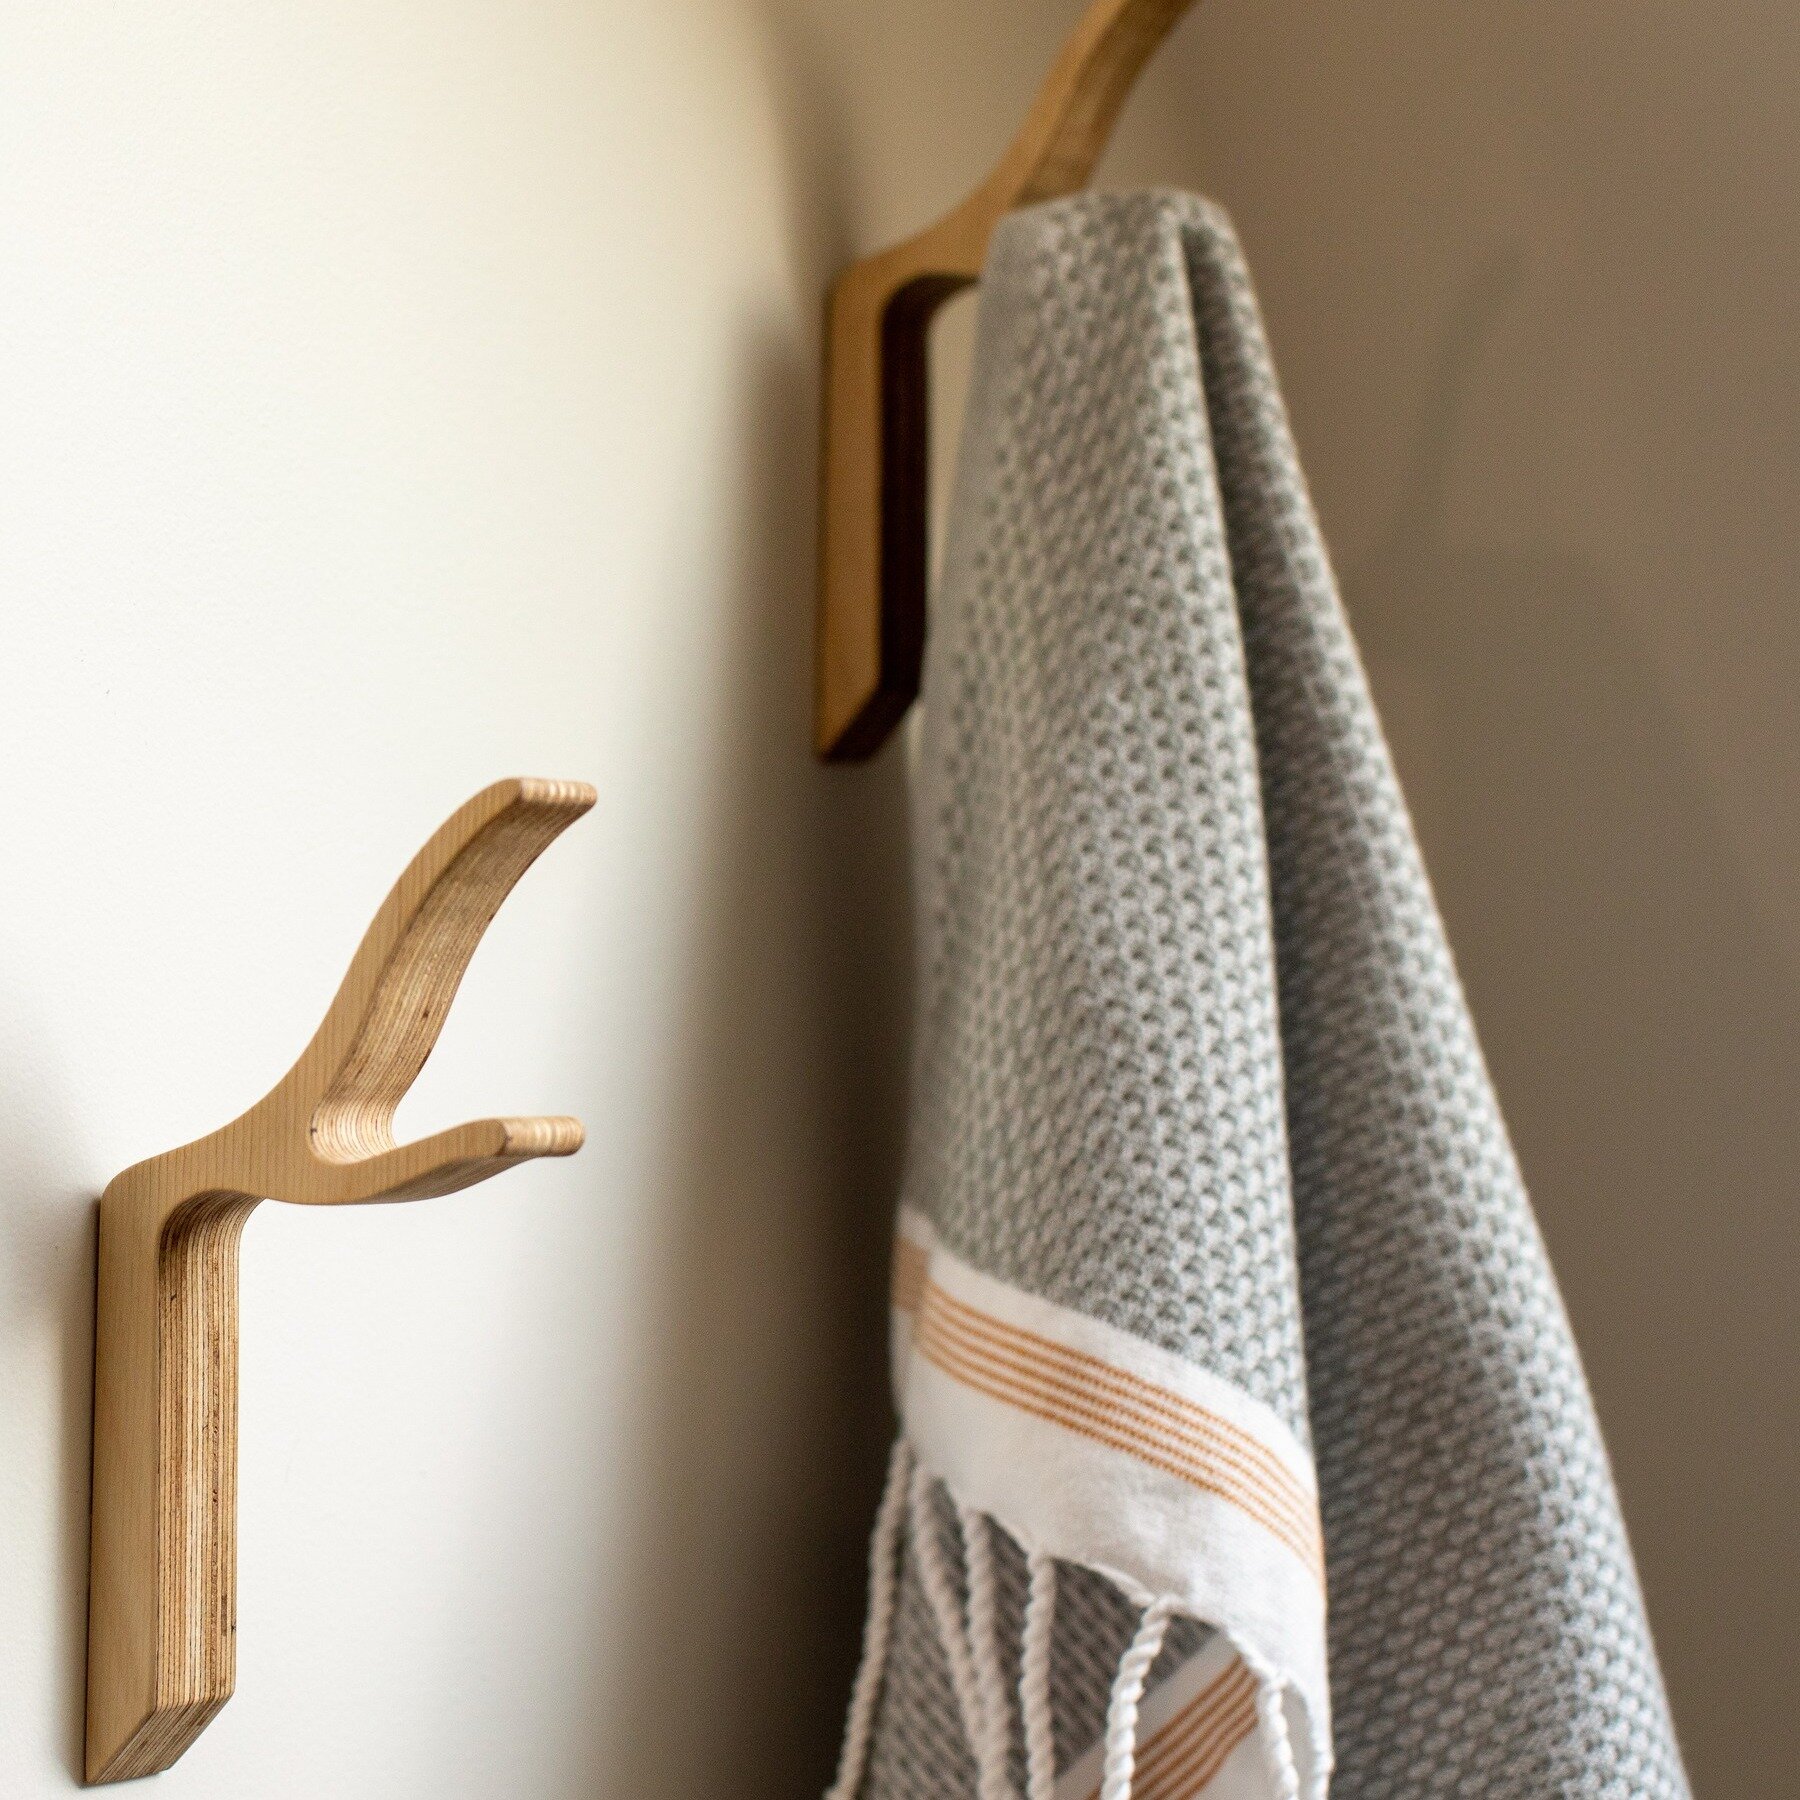 Have you ever complained that your towel is still damp after hanging it to dry? These beautiful bamboo hooks on Etsy solve that problem for our clients and we love the organic, handmade look in a fresh, renovated bath.
.
Design: Barefoot Dwelling 
Ph